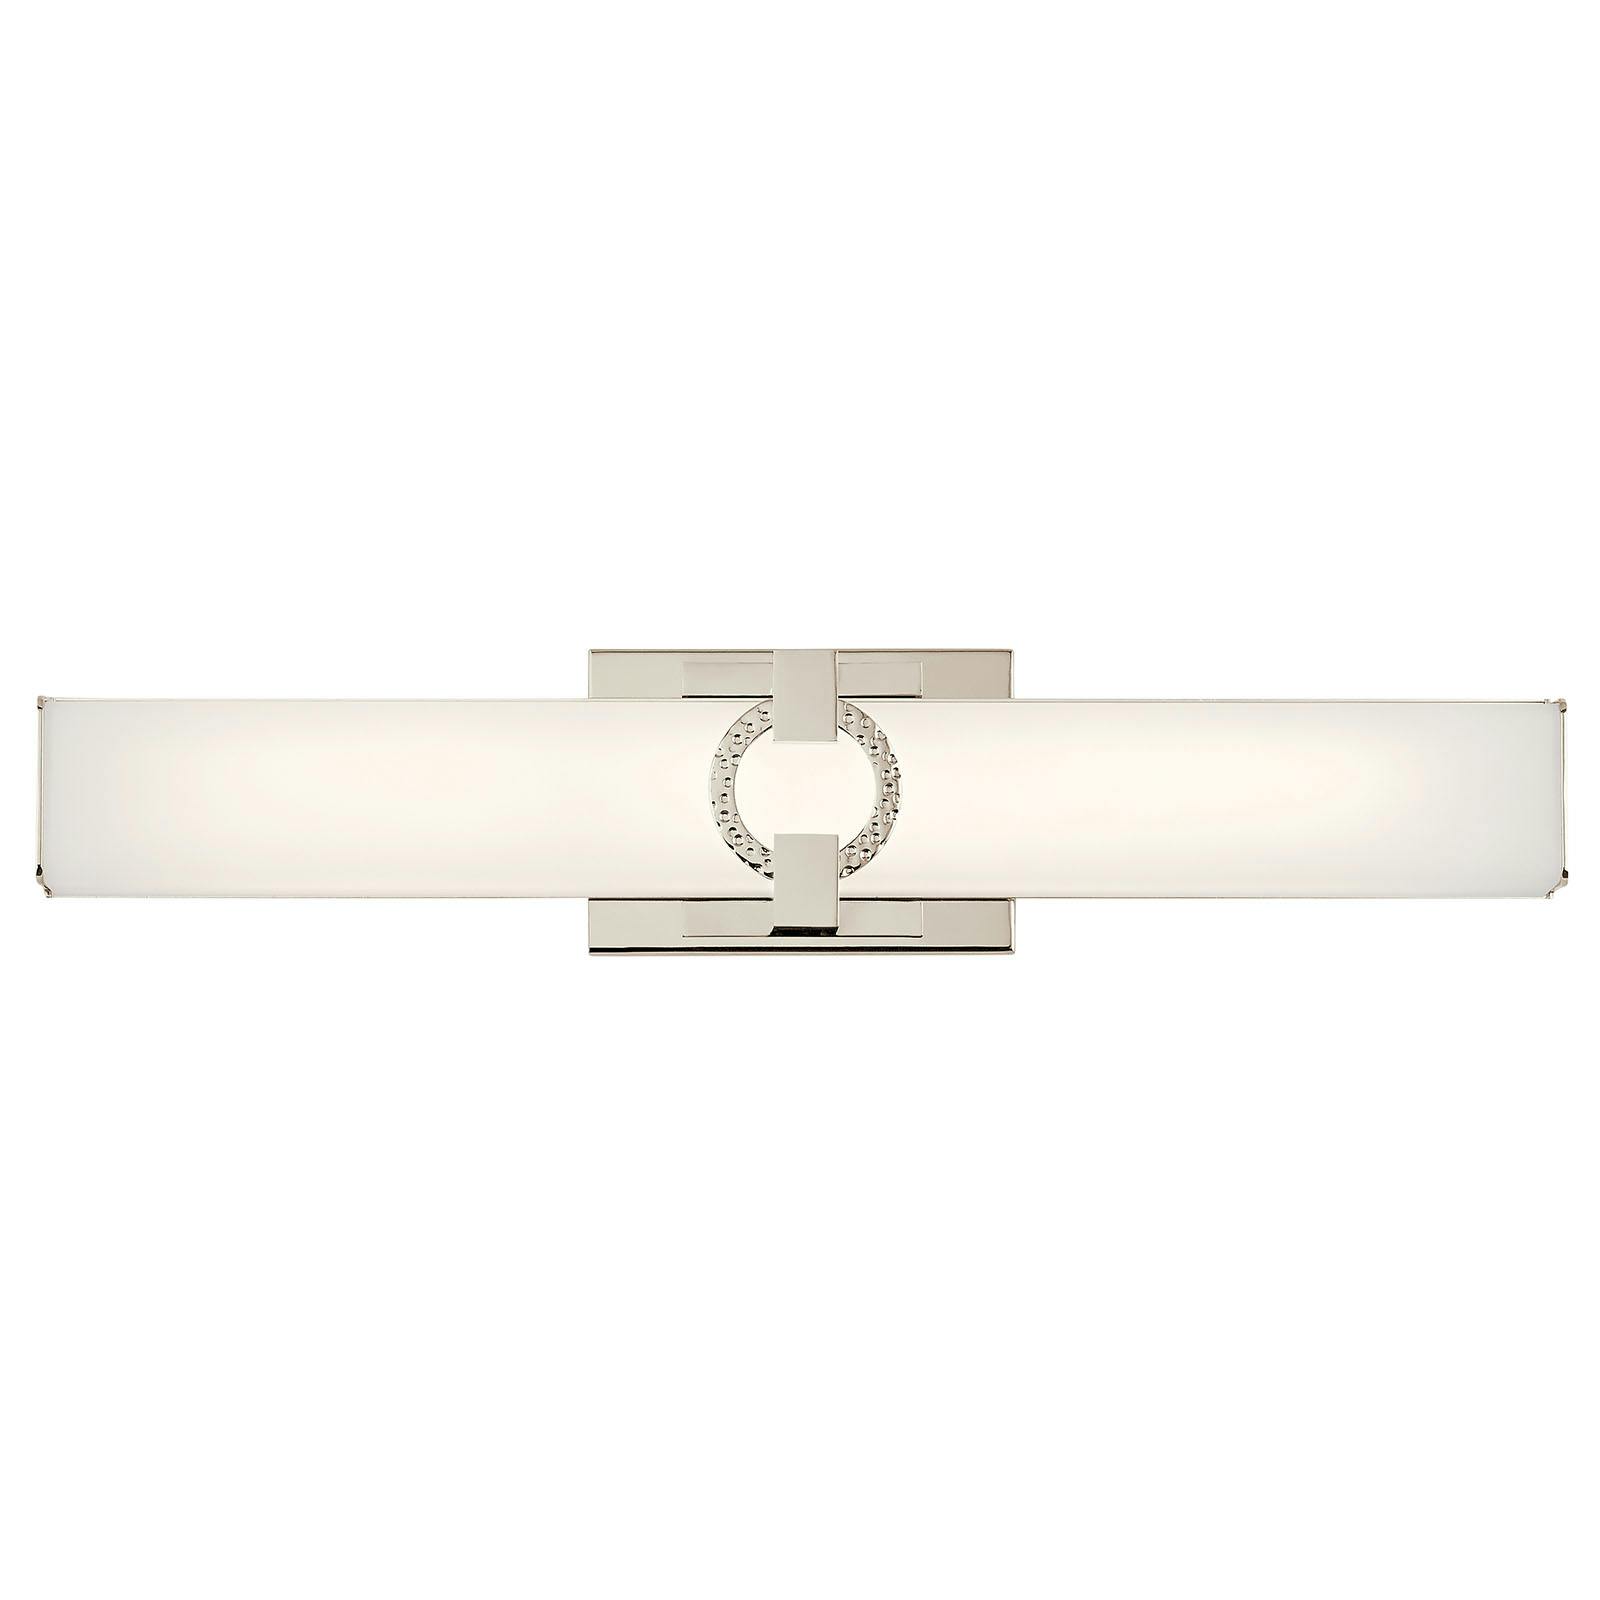 Front view of the Bordeaux 22" LED Vanity Light Nickel on a white background